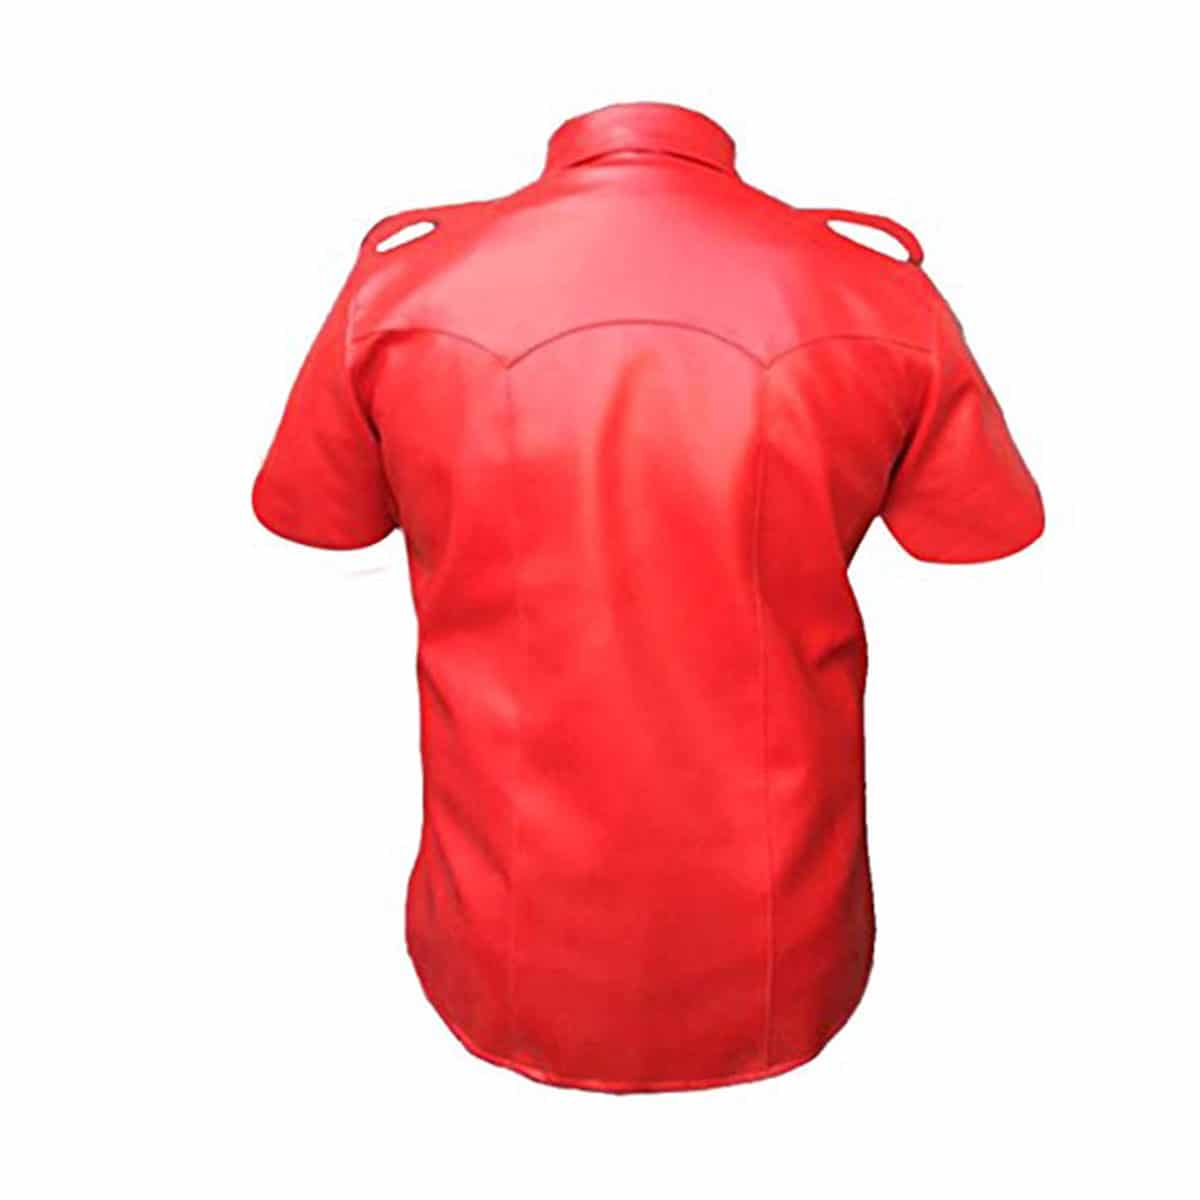 Mens Cow or Sheep Red Leather Police Uniform Style Shirt - (PSHS-RED)